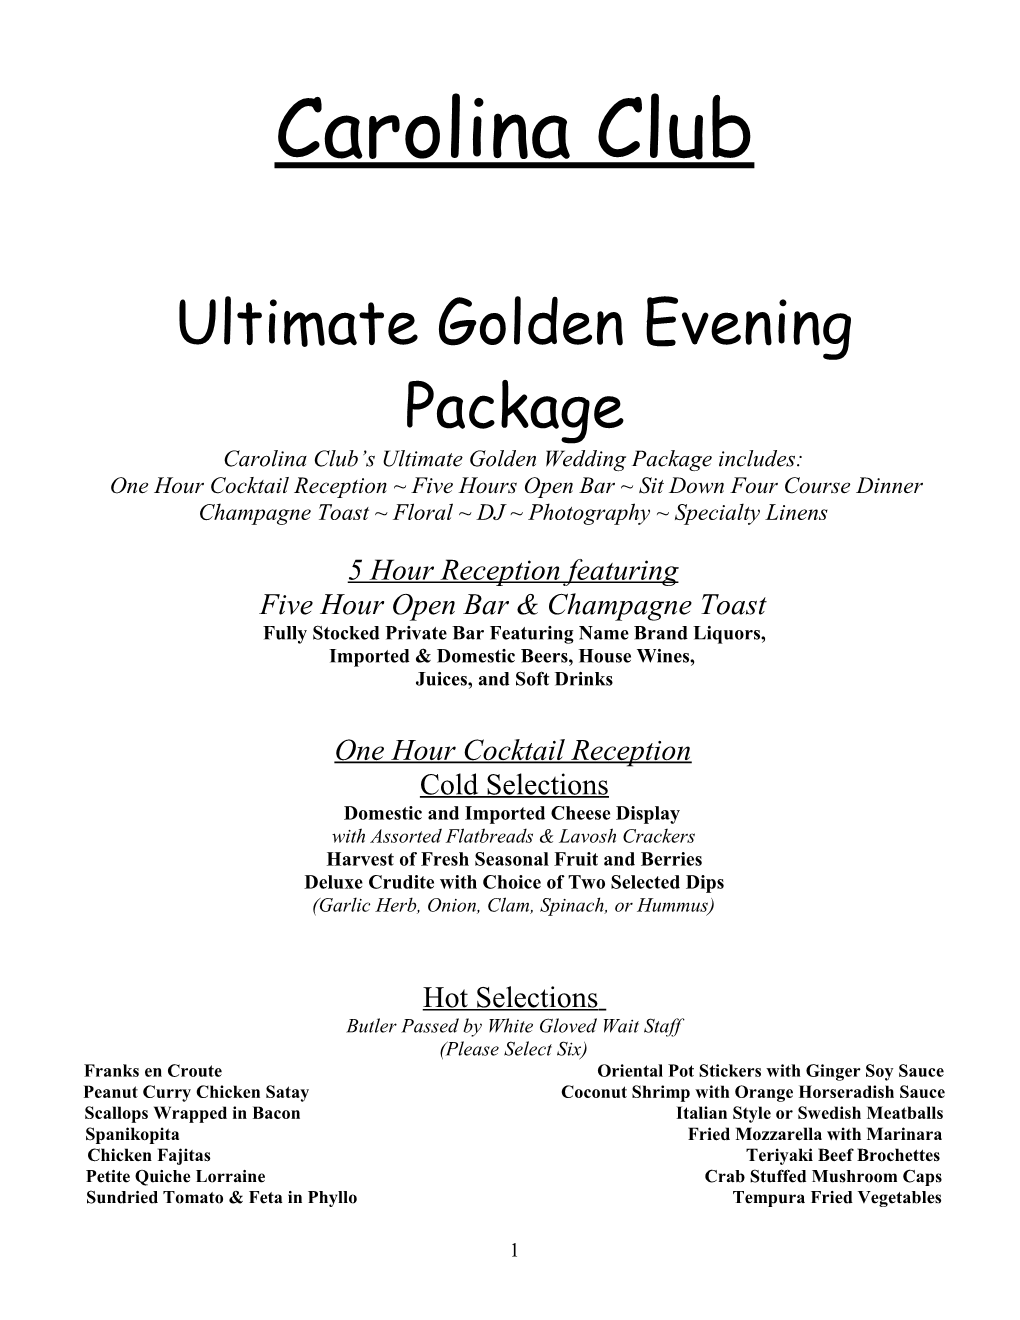 Carolina Club S Ultimate Golden Wedding Package Includes